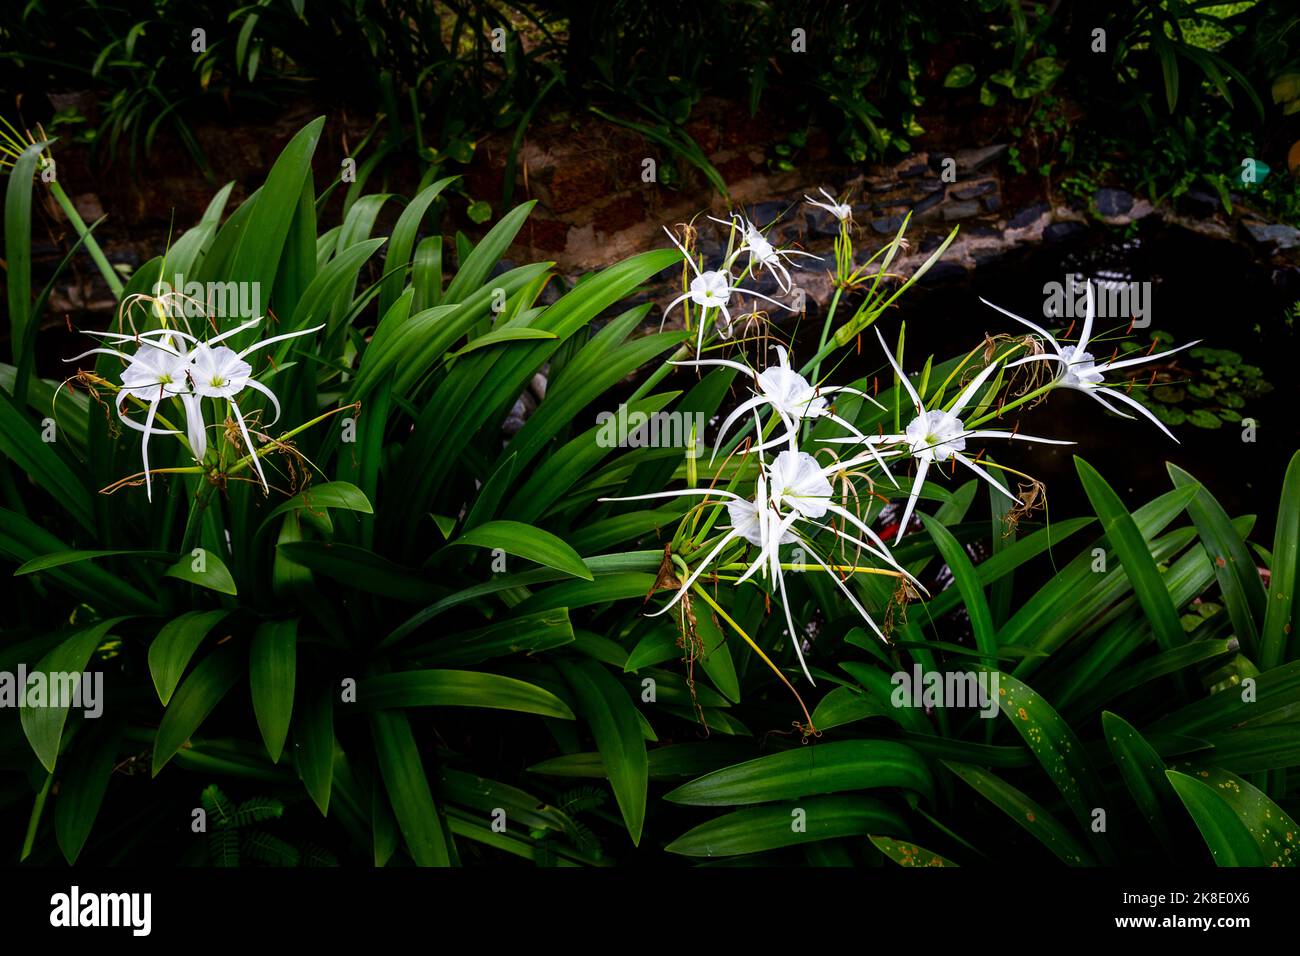 Spider lilly growing again a green garden area. Stock Photo